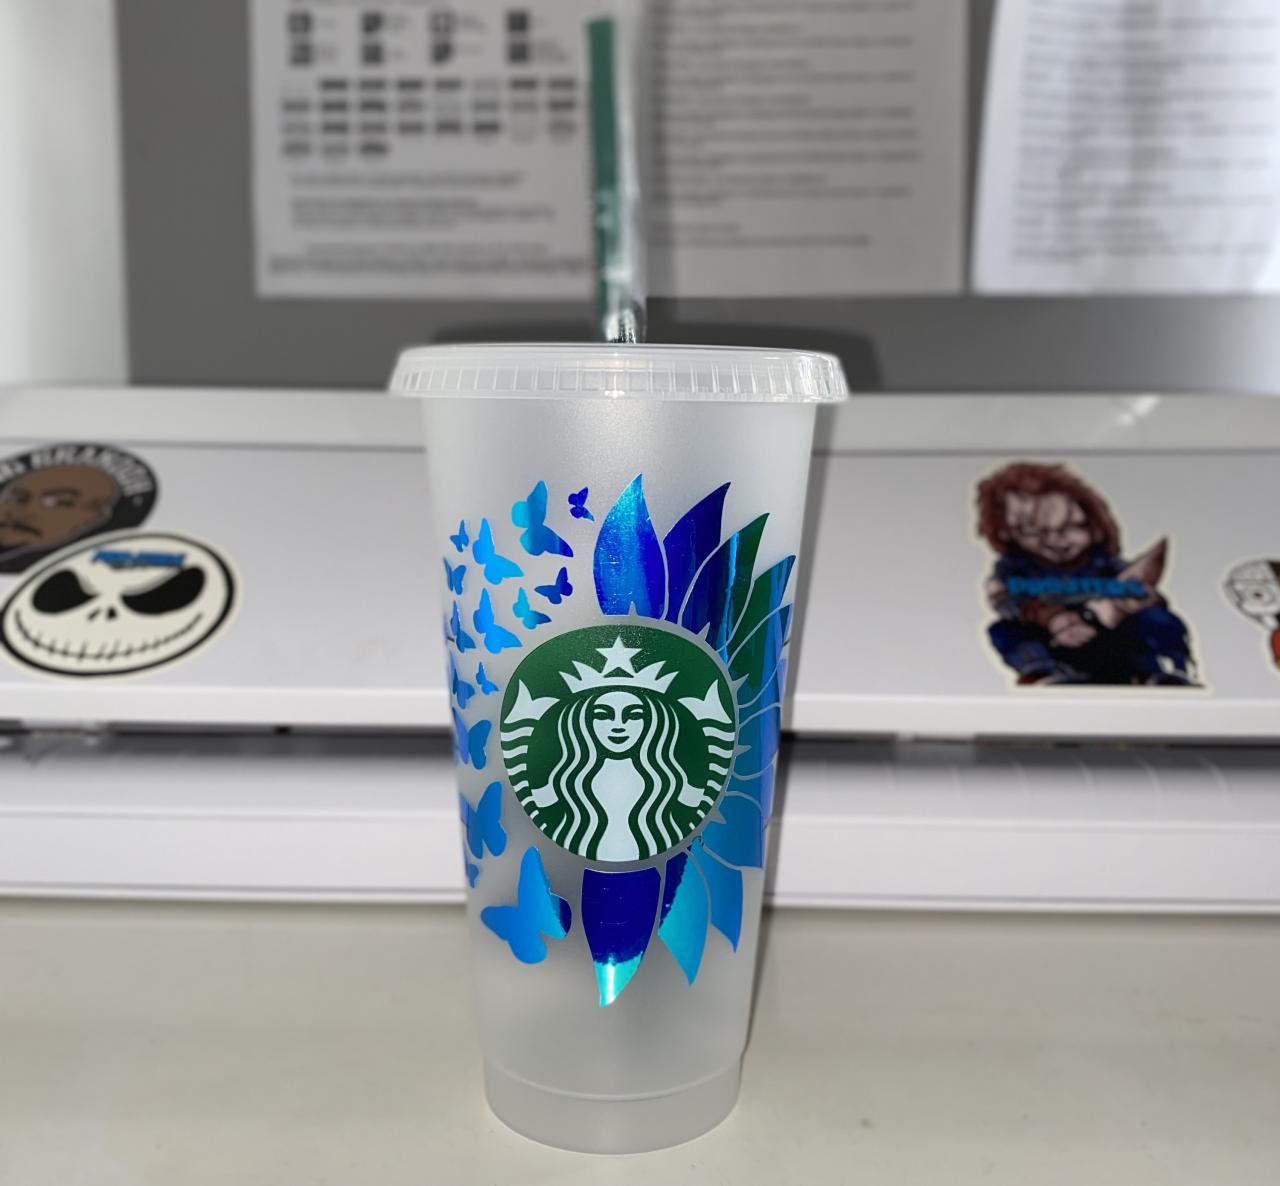 Butterflies Starbucks personalized cup